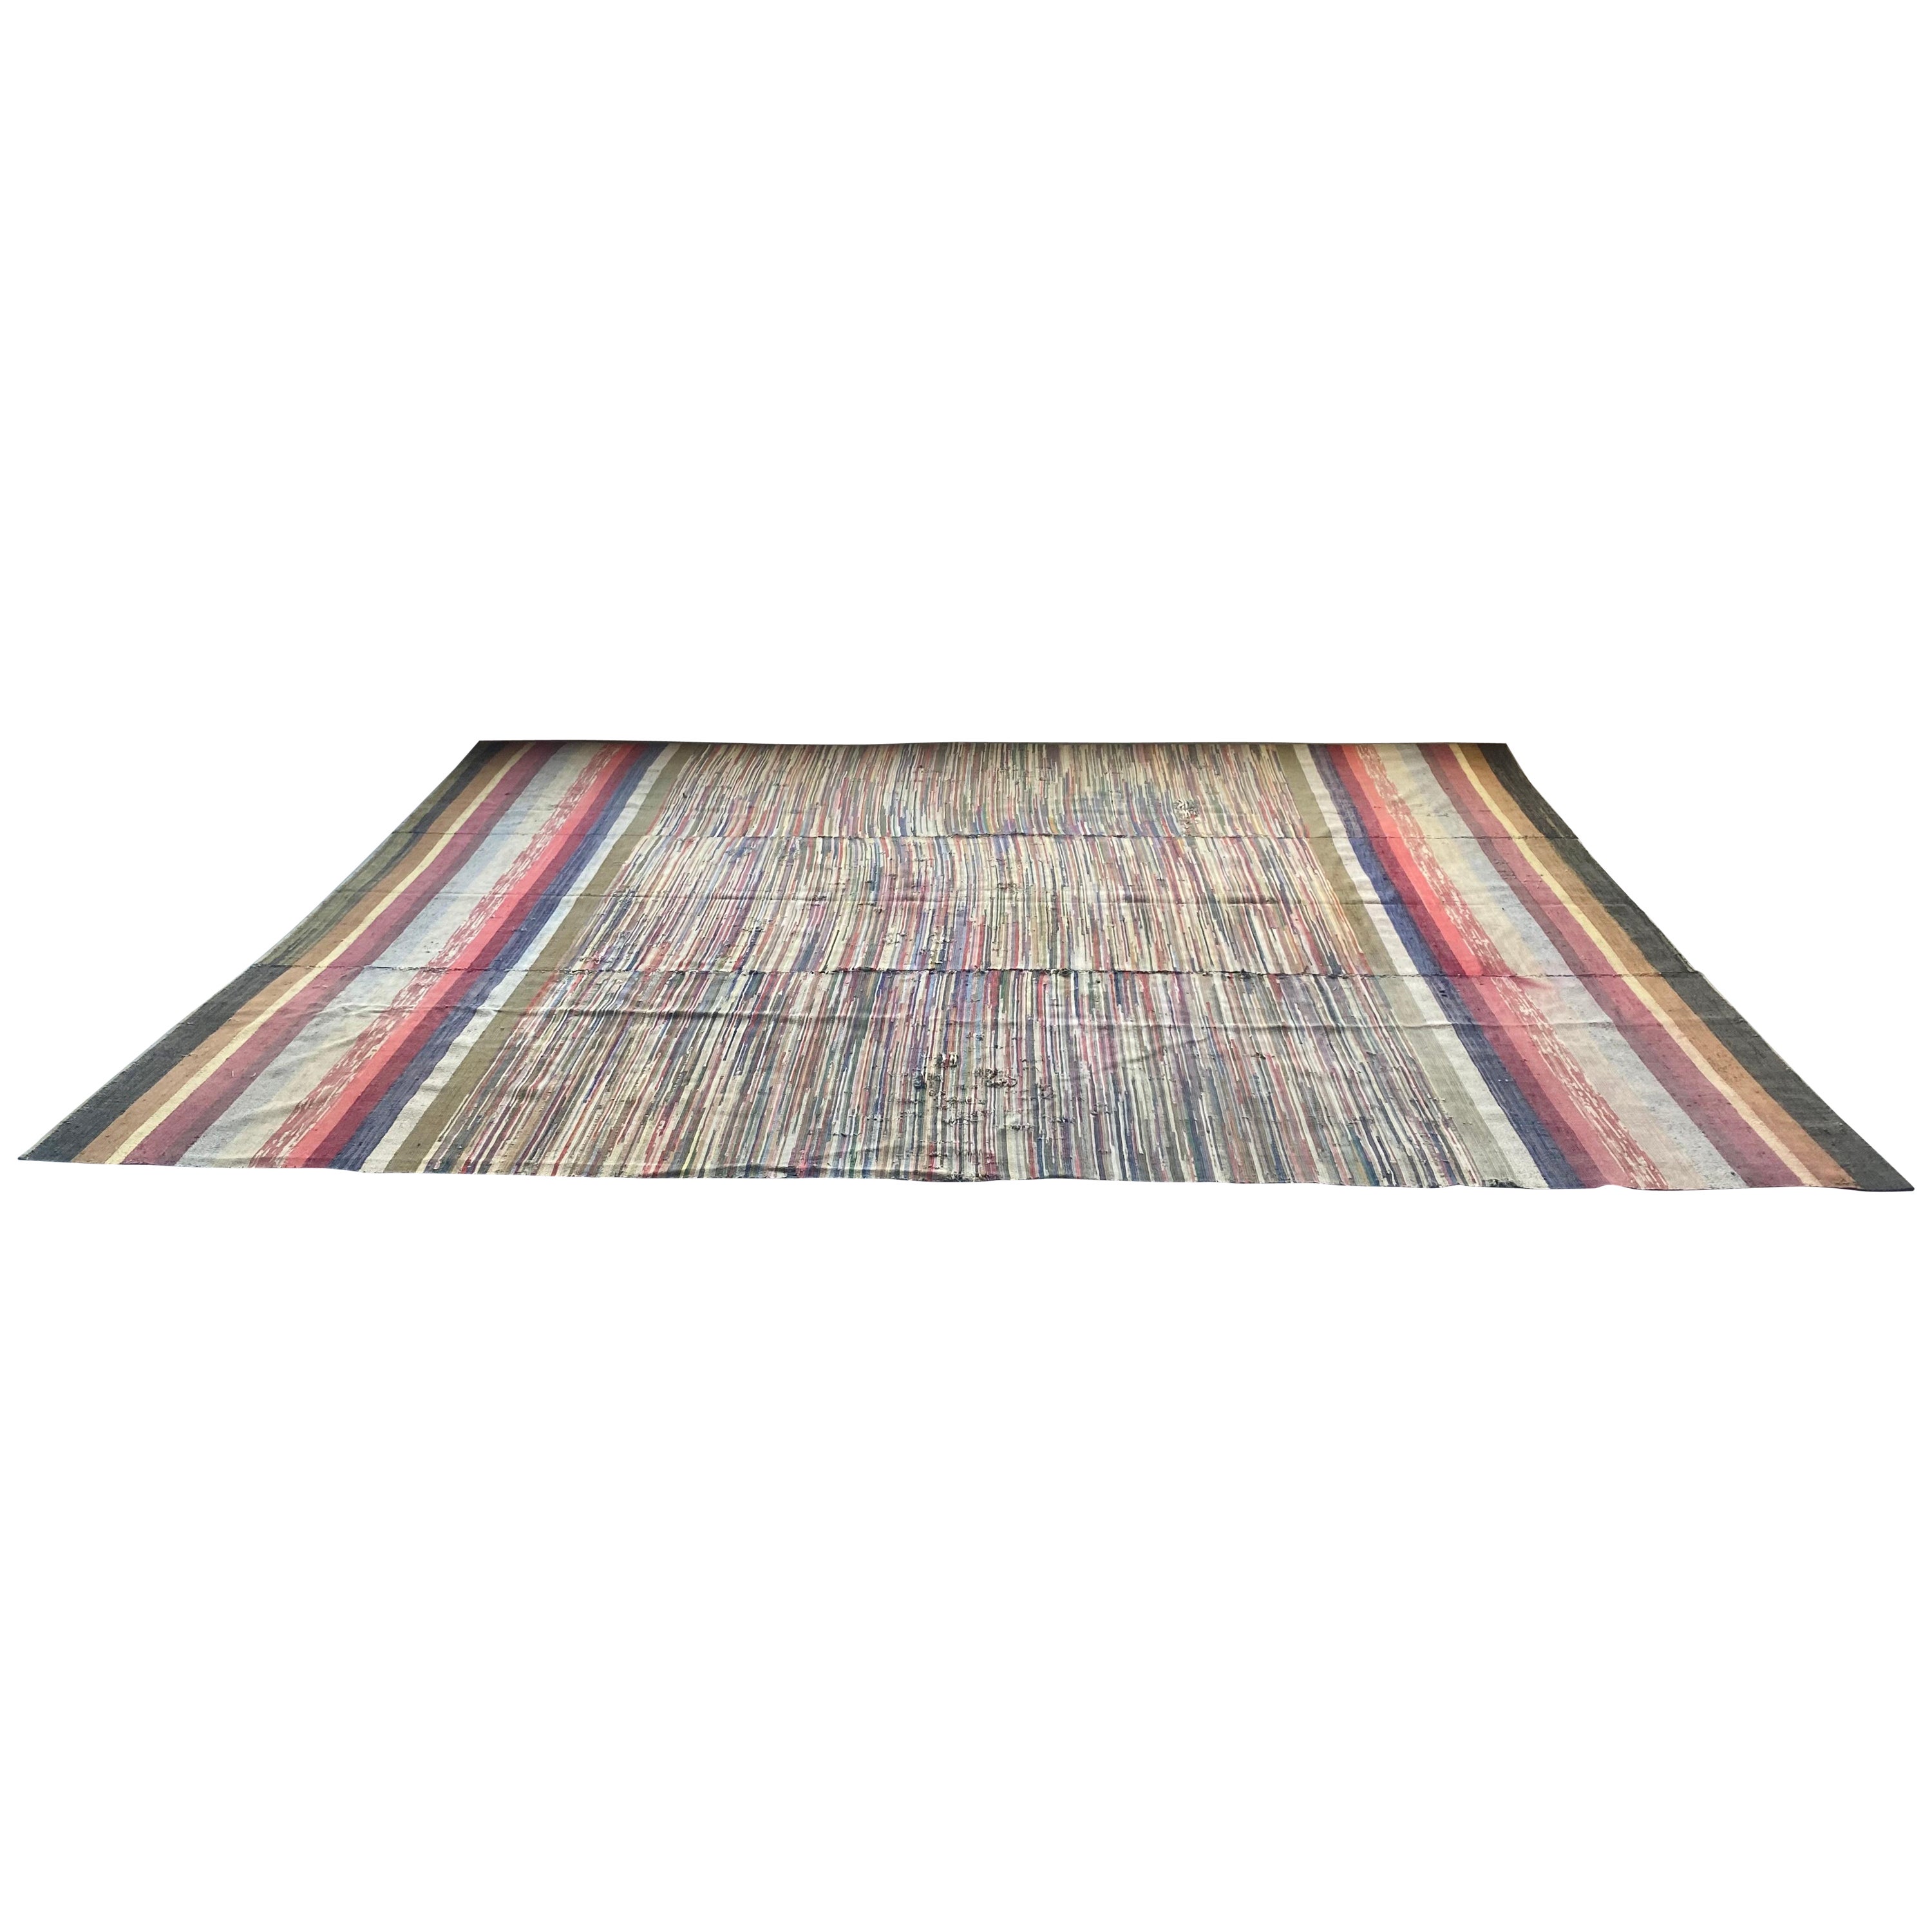 Monumental Late 19th Century American Shaker Rag Rug (139" x 97") For Sale